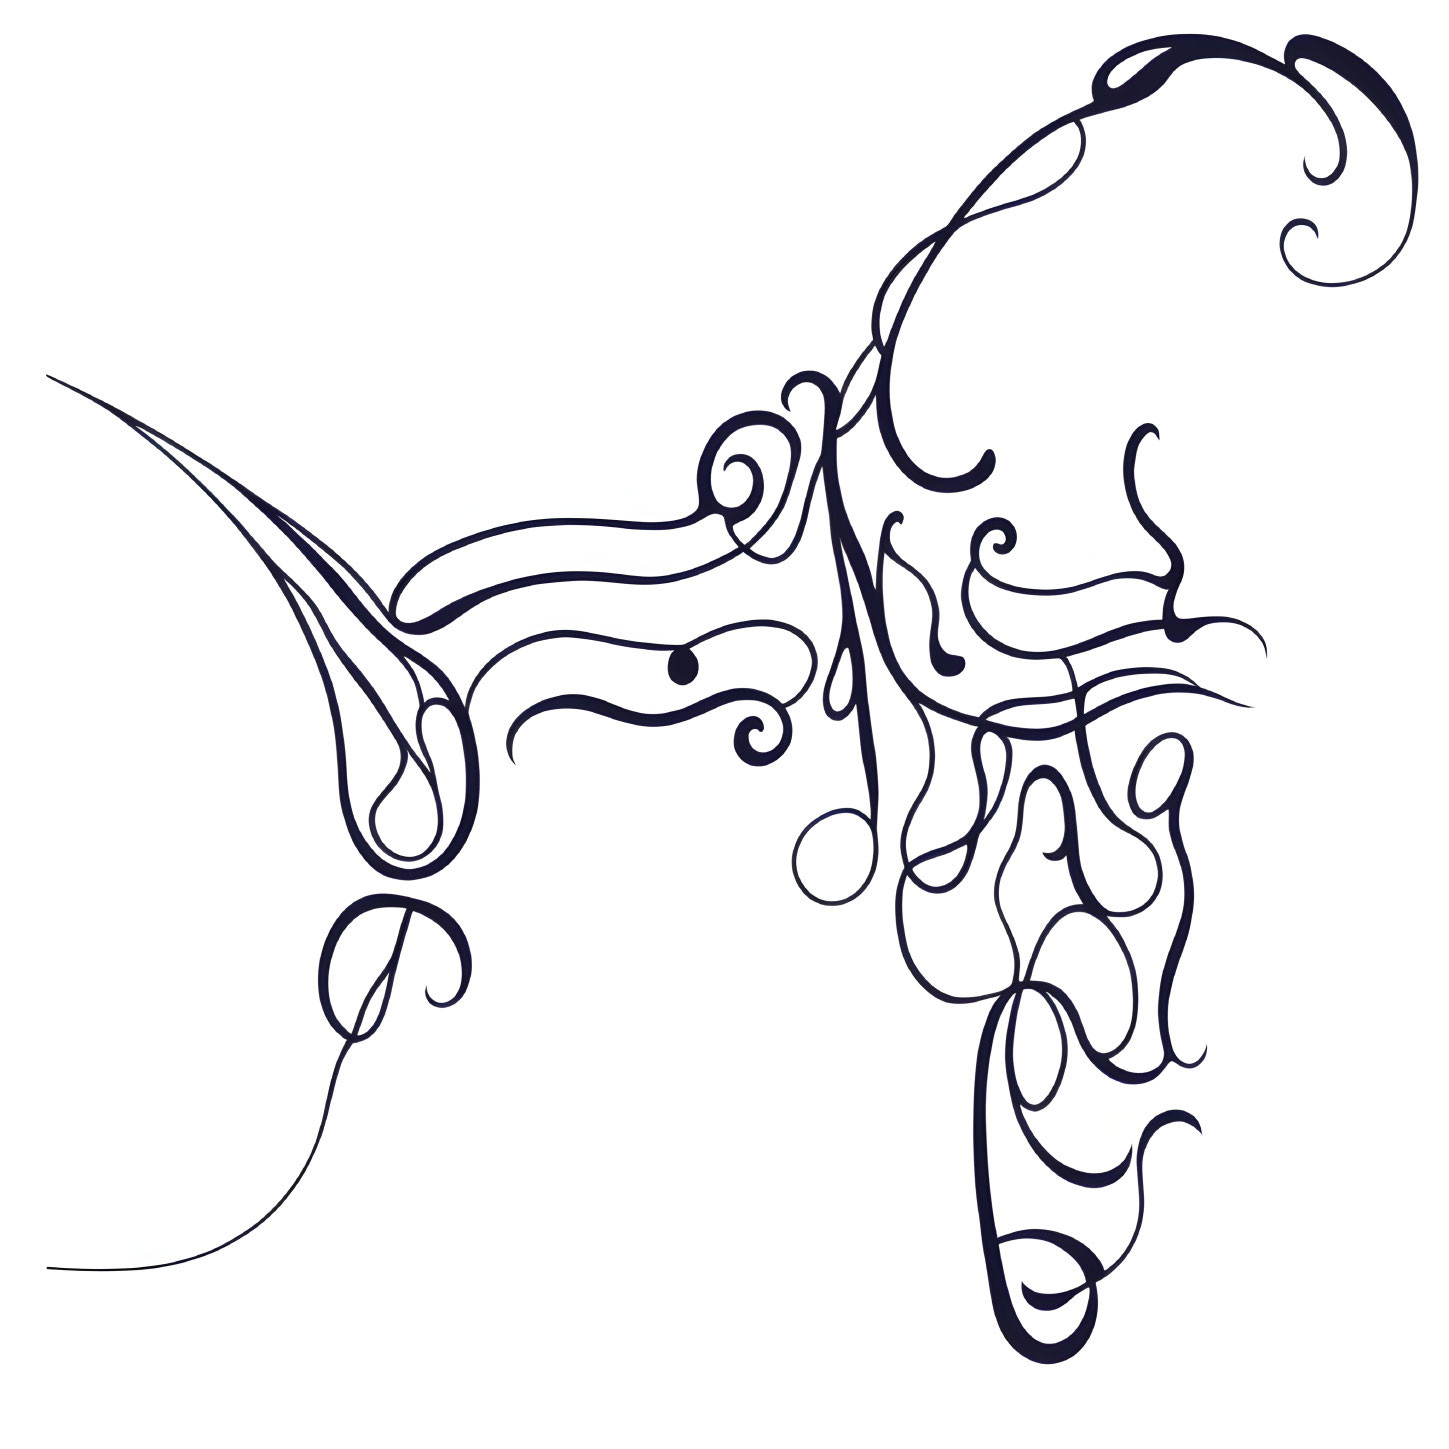 Abstract line art: Two profiles in swirls and curls